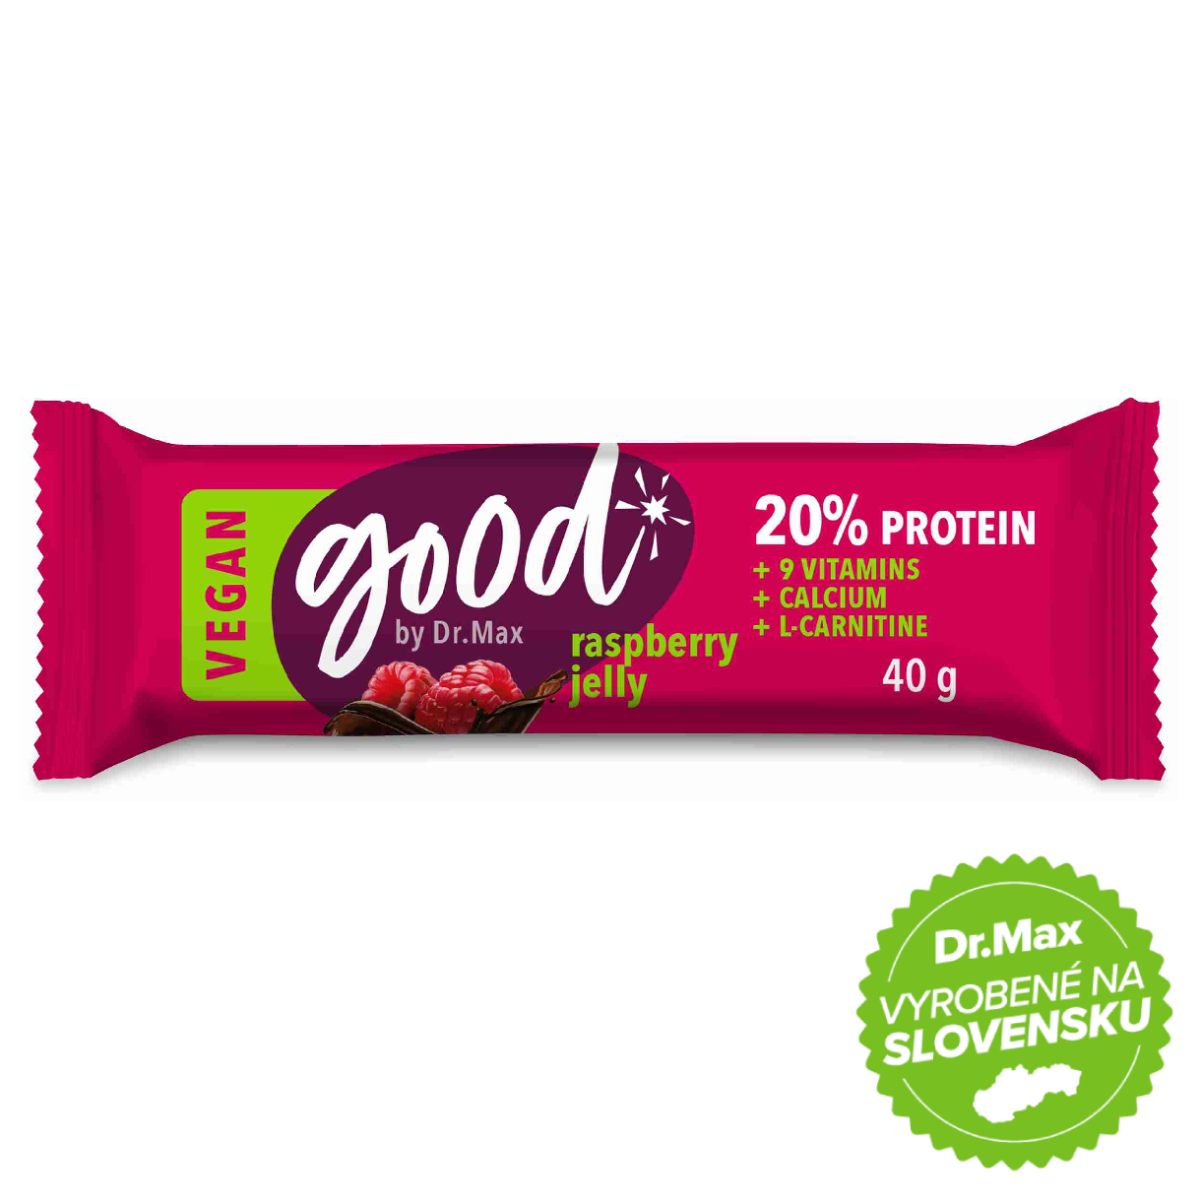 Good by Dr. Max Protein Bar 20 percent Raspberry Jelly 40 g